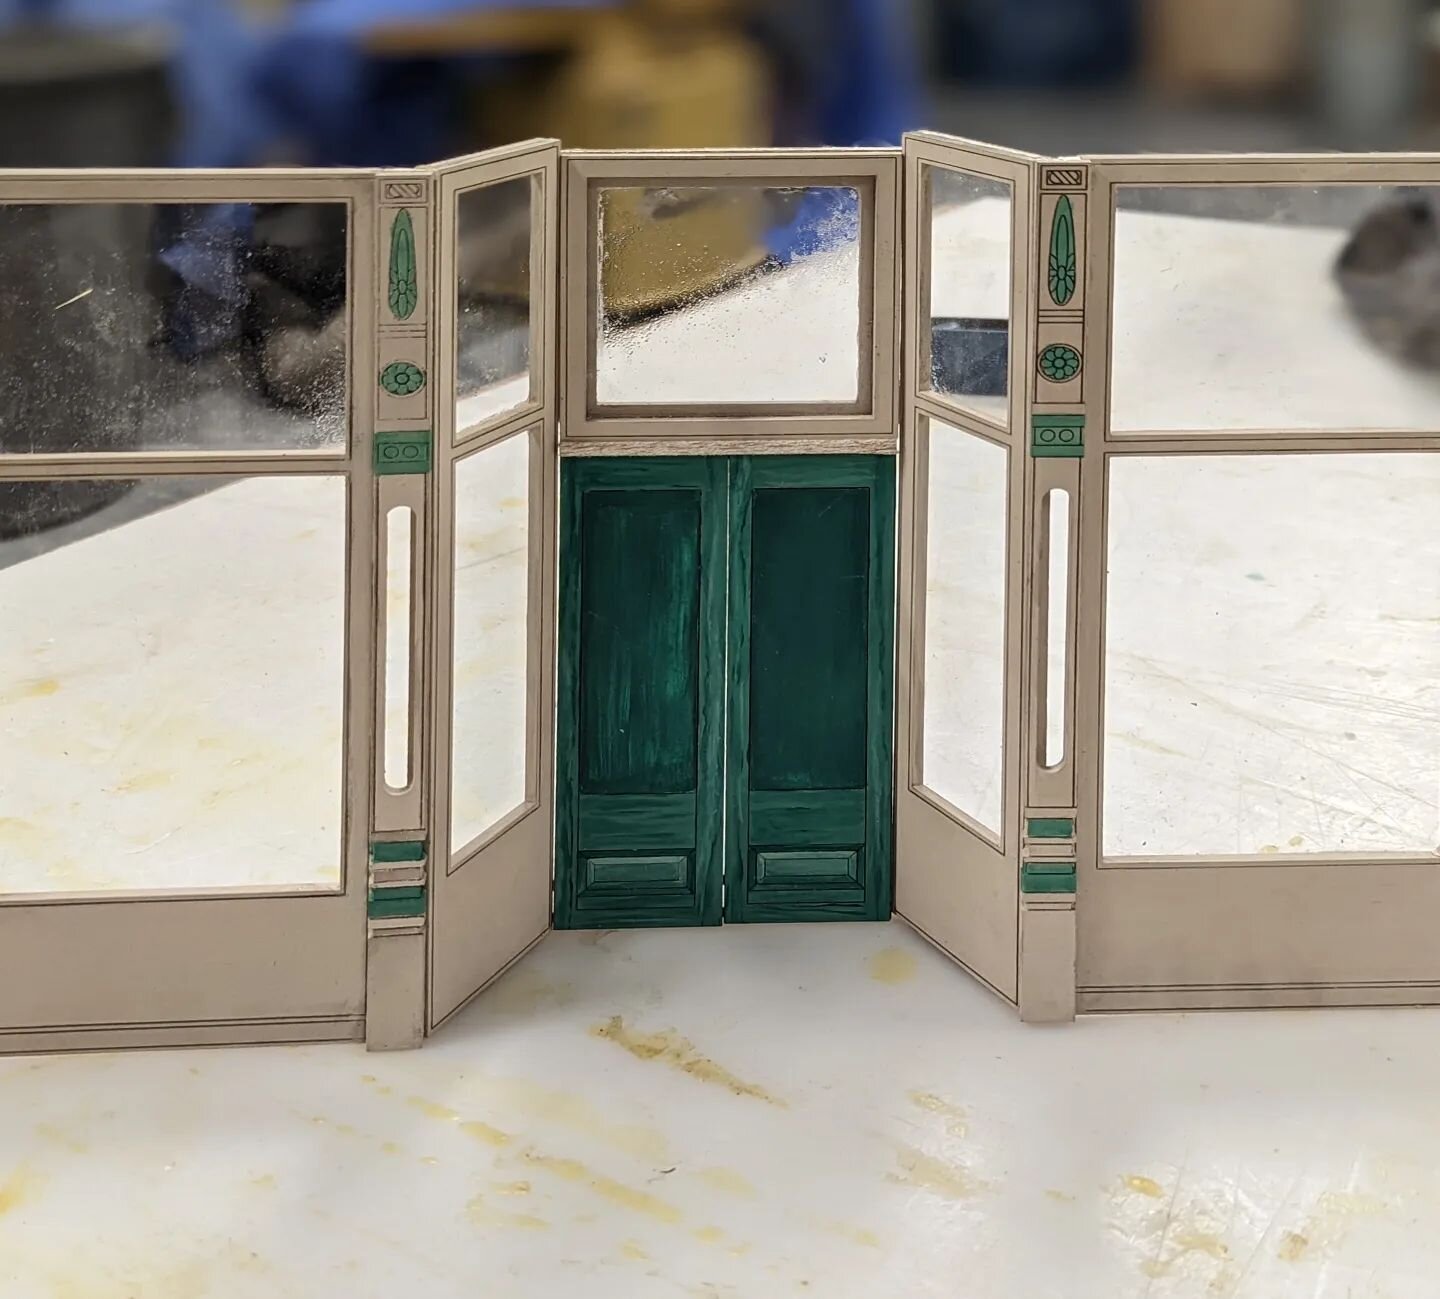 Work in progress - a dollhouse facade and cutaway. Modeled after a storefront from the Mesker Ironworks catalog, this dollhouse has laser cut elements and a lot of detail. Achieved using @glowforge